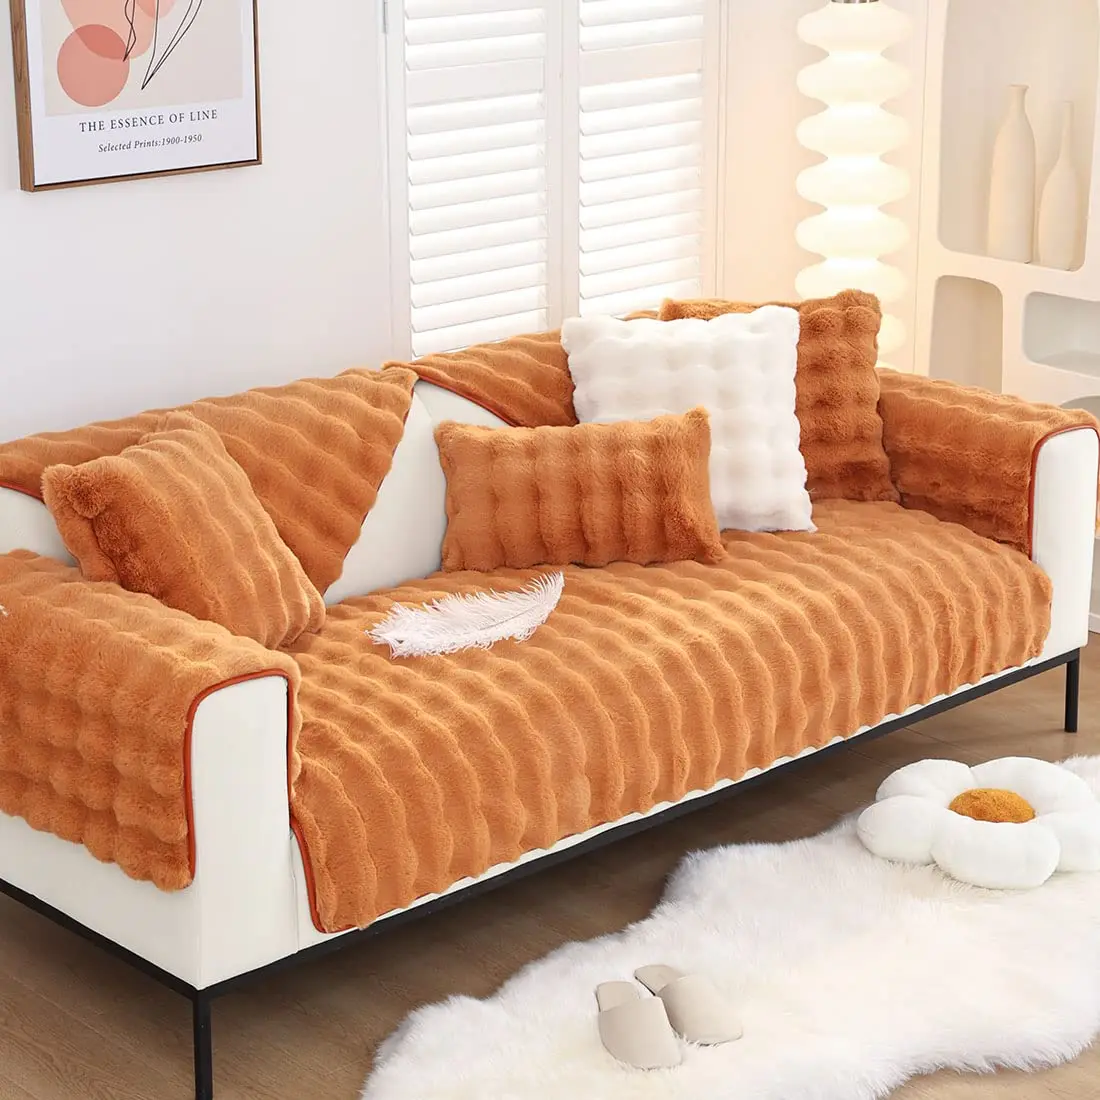 New Arrival Highly-thicken Rabbit Plush Sofa Cover Non-Slip Couch Cover 1 2 3 seat Customized